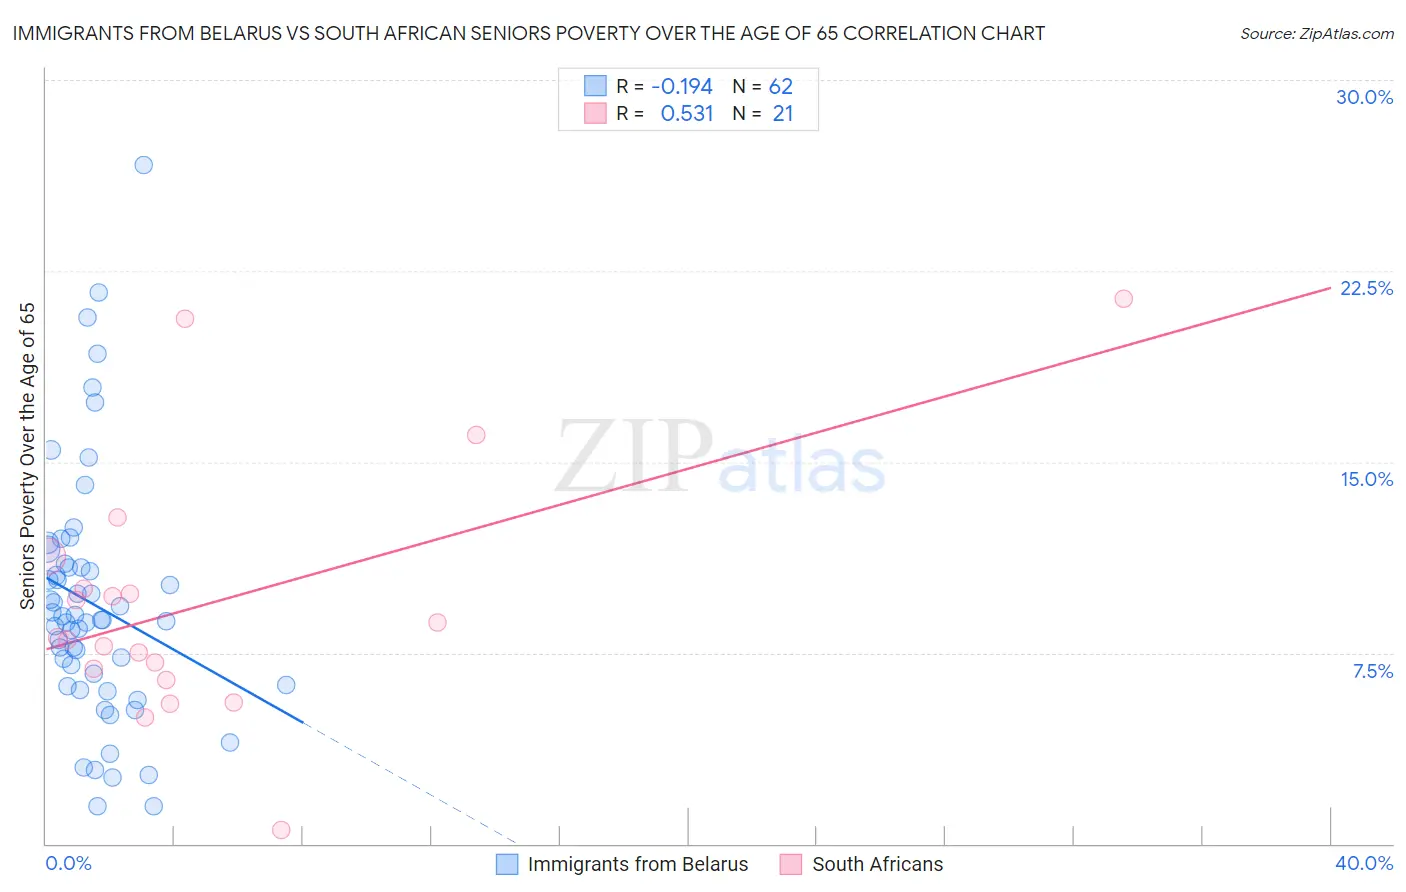 Immigrants from Belarus vs South African Seniors Poverty Over the Age of 65